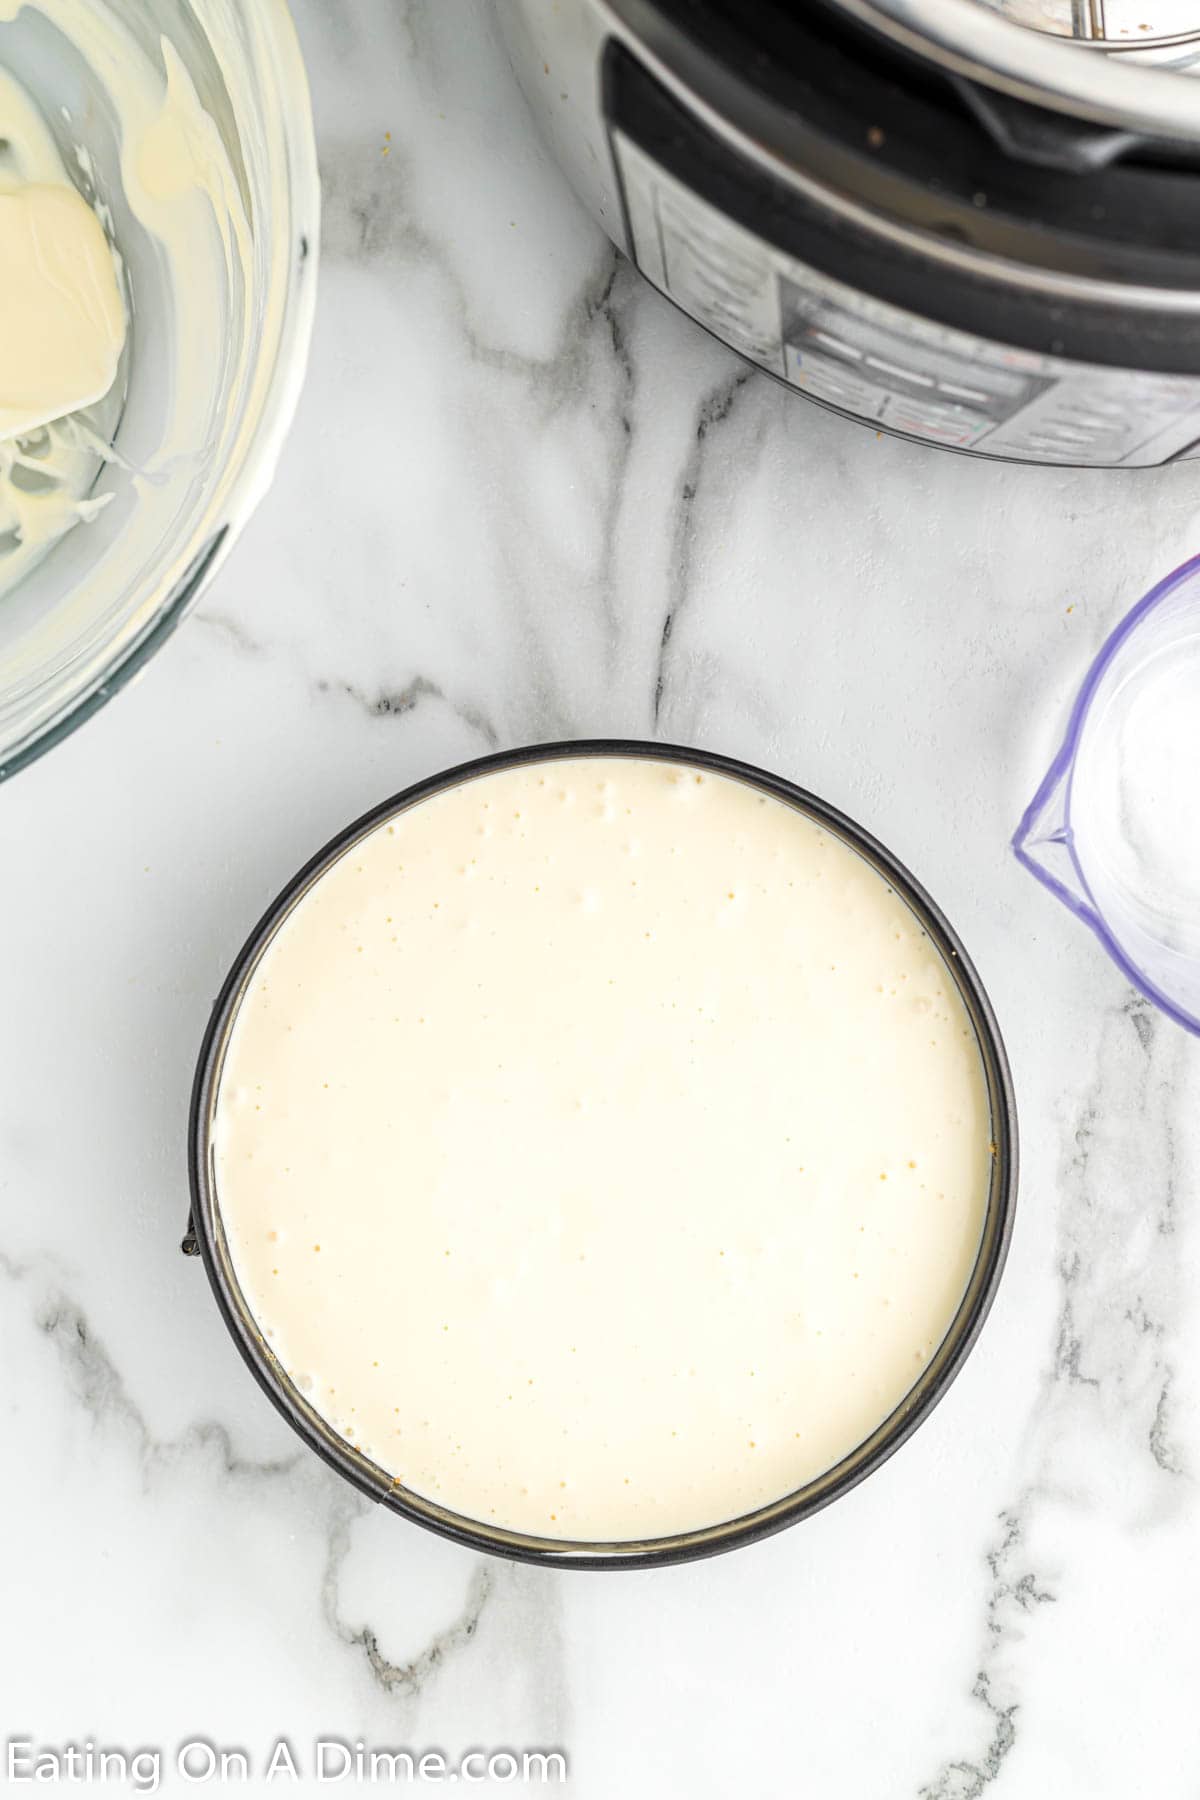 Pour the cheesecake mixture into the pan with the crust